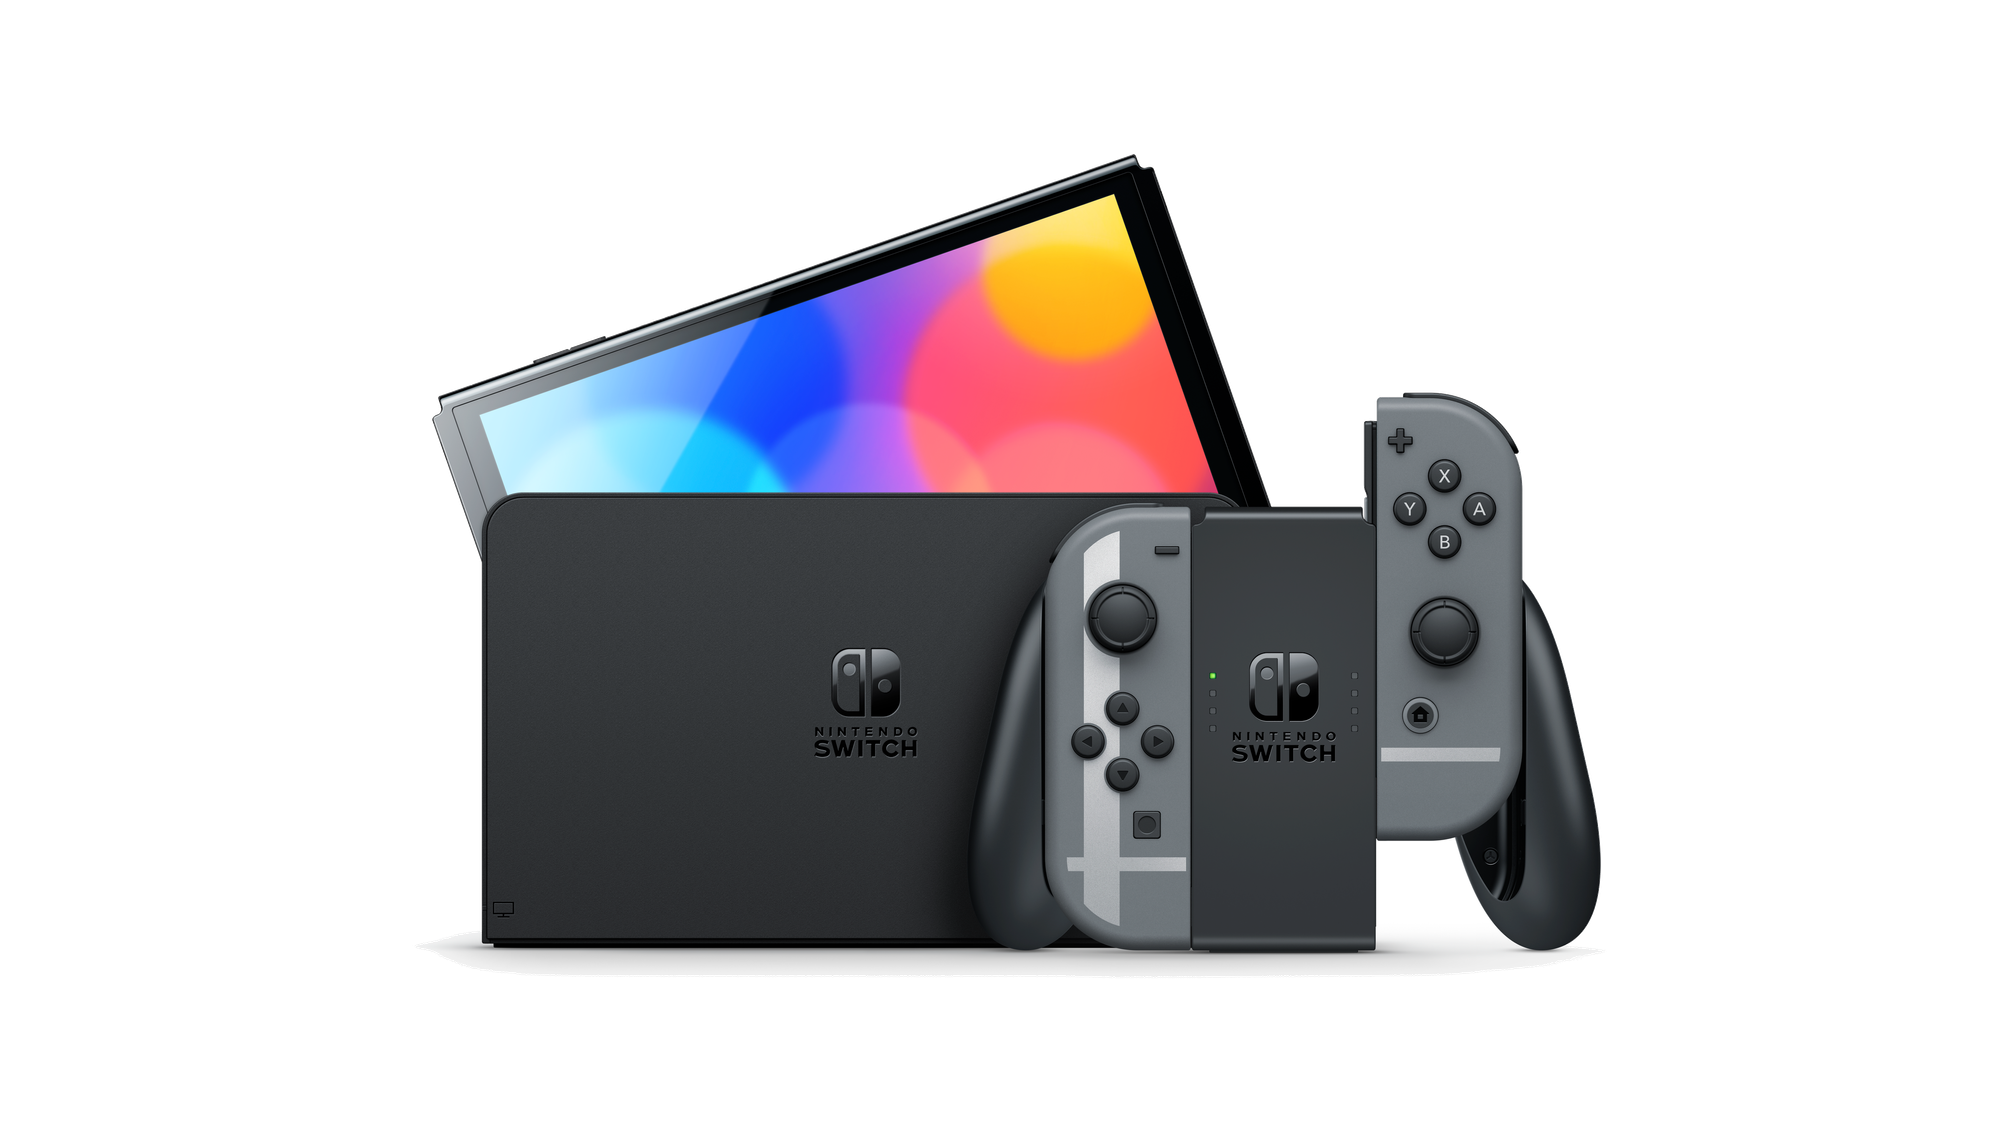 NINTENDO OFFERS SUPER SMASH BROS. ULTIMATE AND NINTENDO SWITCH – OLED MODEL BUNDLE FOR BLACK FRIDAY AND ANNOUNCES OTHER HOLIDAY DEALS